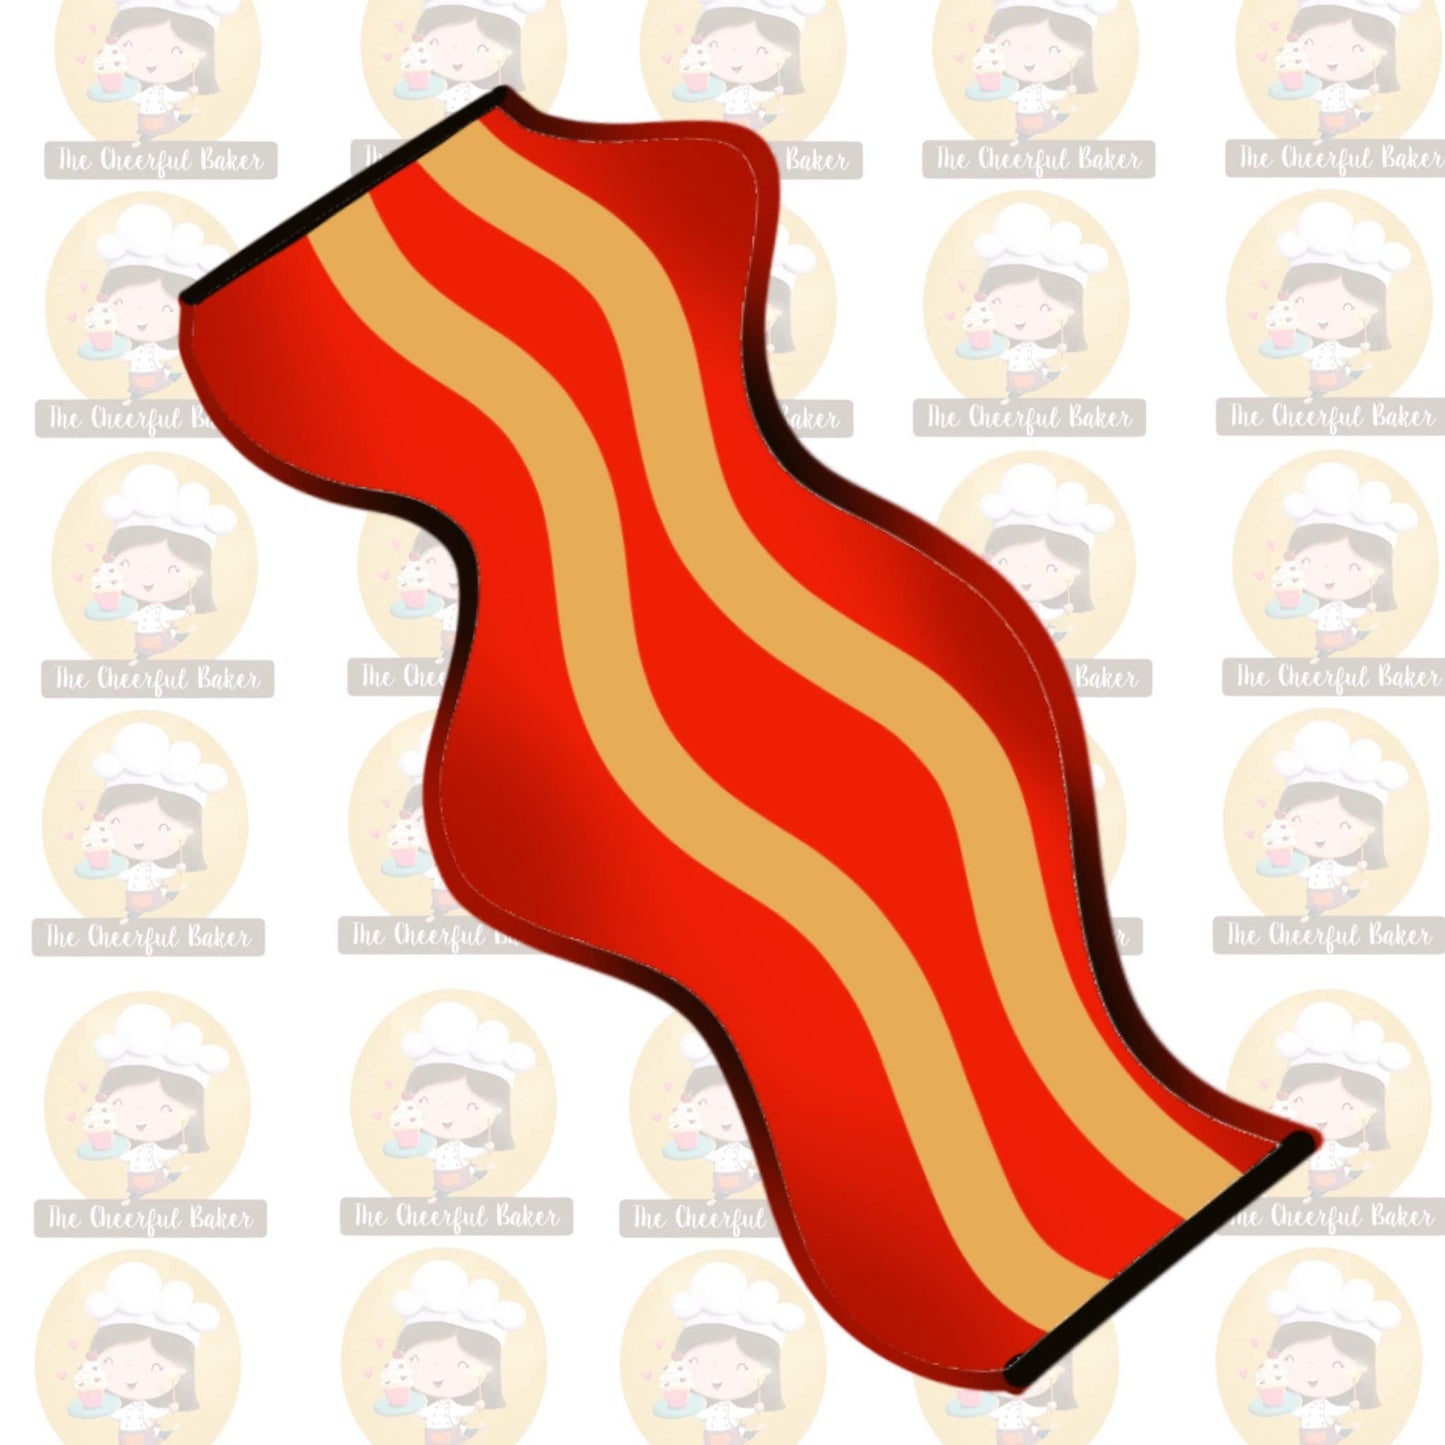 Bacon cookie cutter